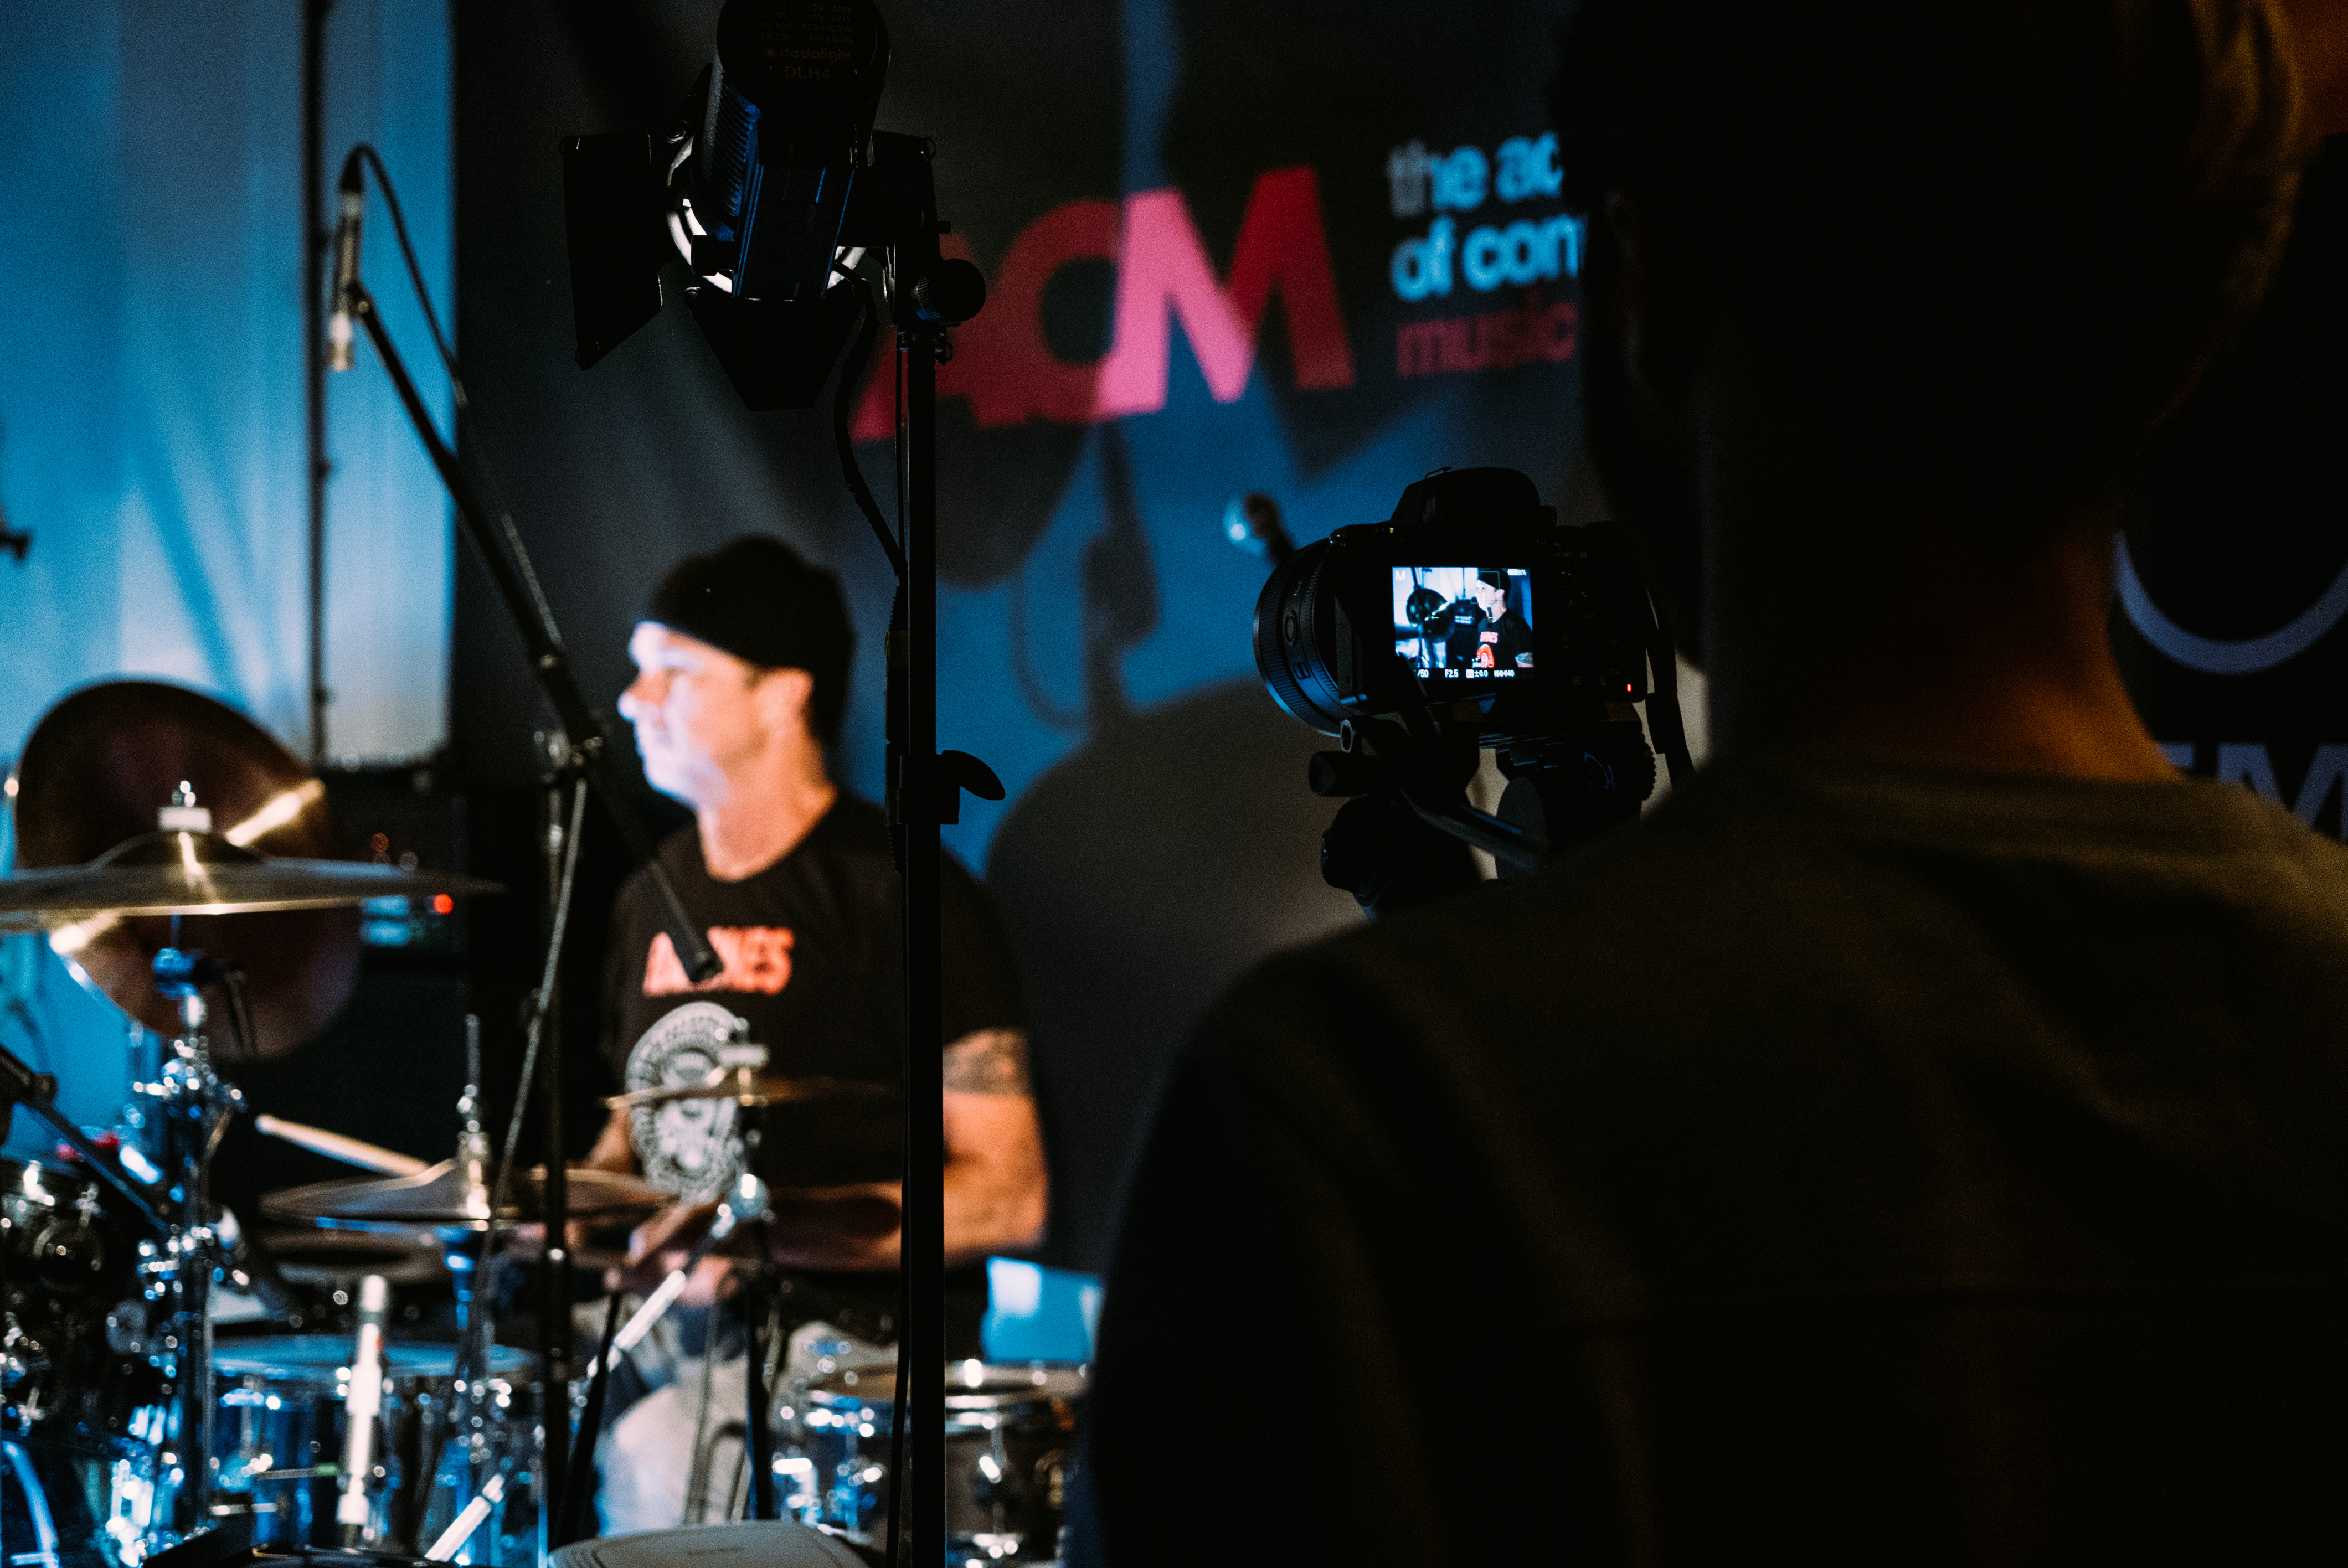 ACM welcome Red Hot Chilli Peppers drummer, Chad Smith